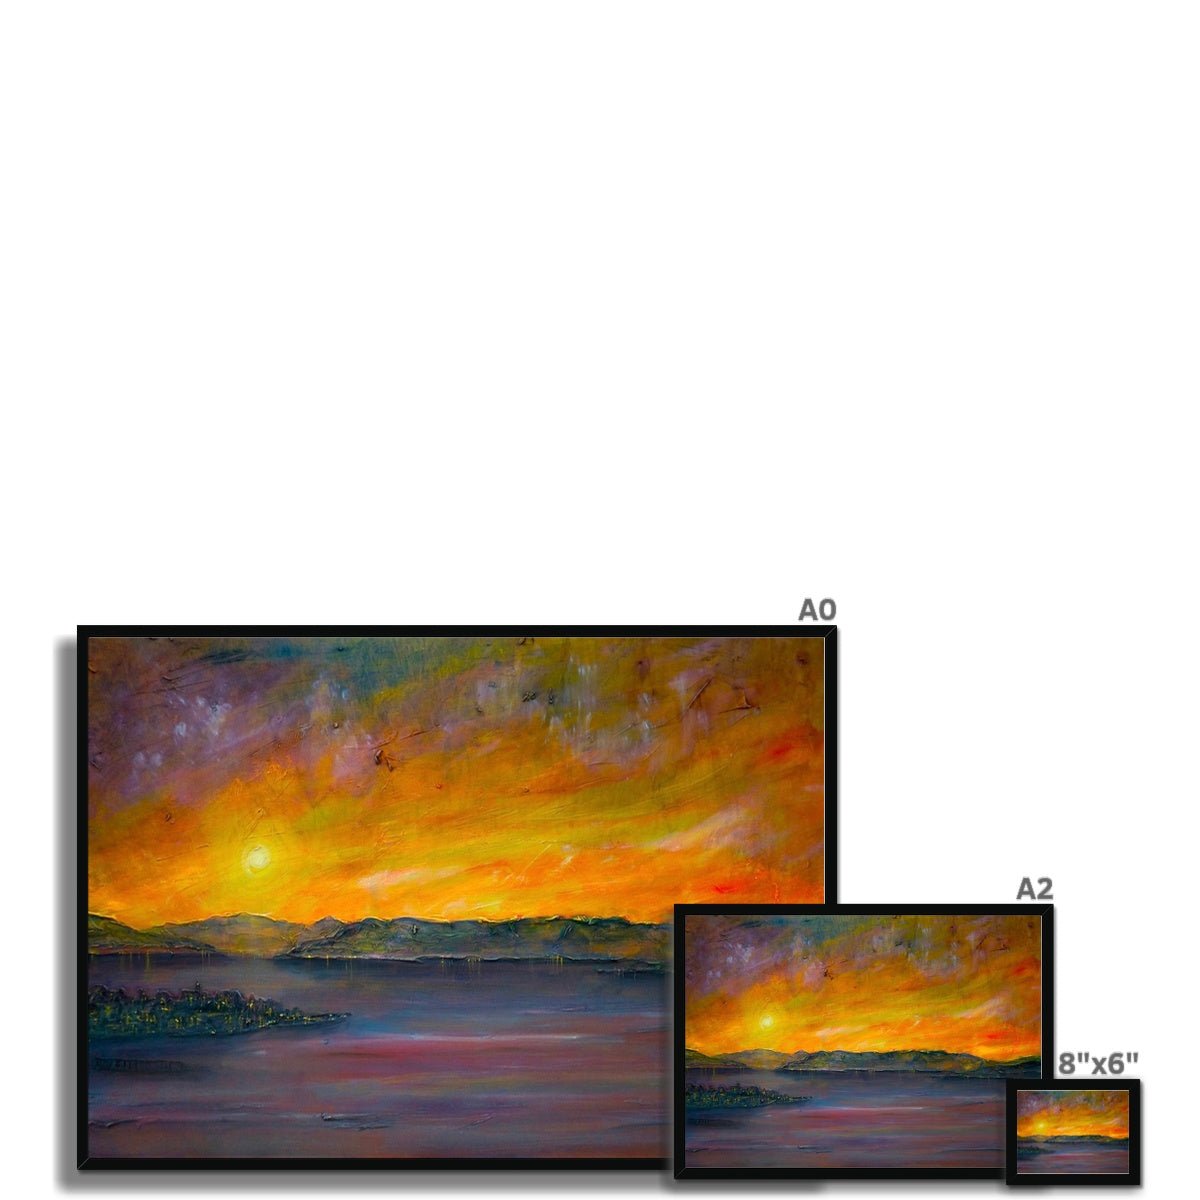 Sunset Over Gourock Painting | Framed Prints From Scotland-Framed Prints-River Clyde Art Gallery-Paintings, Prints, Homeware, Art Gifts From Scotland By Scottish Artist Kevin Hunter